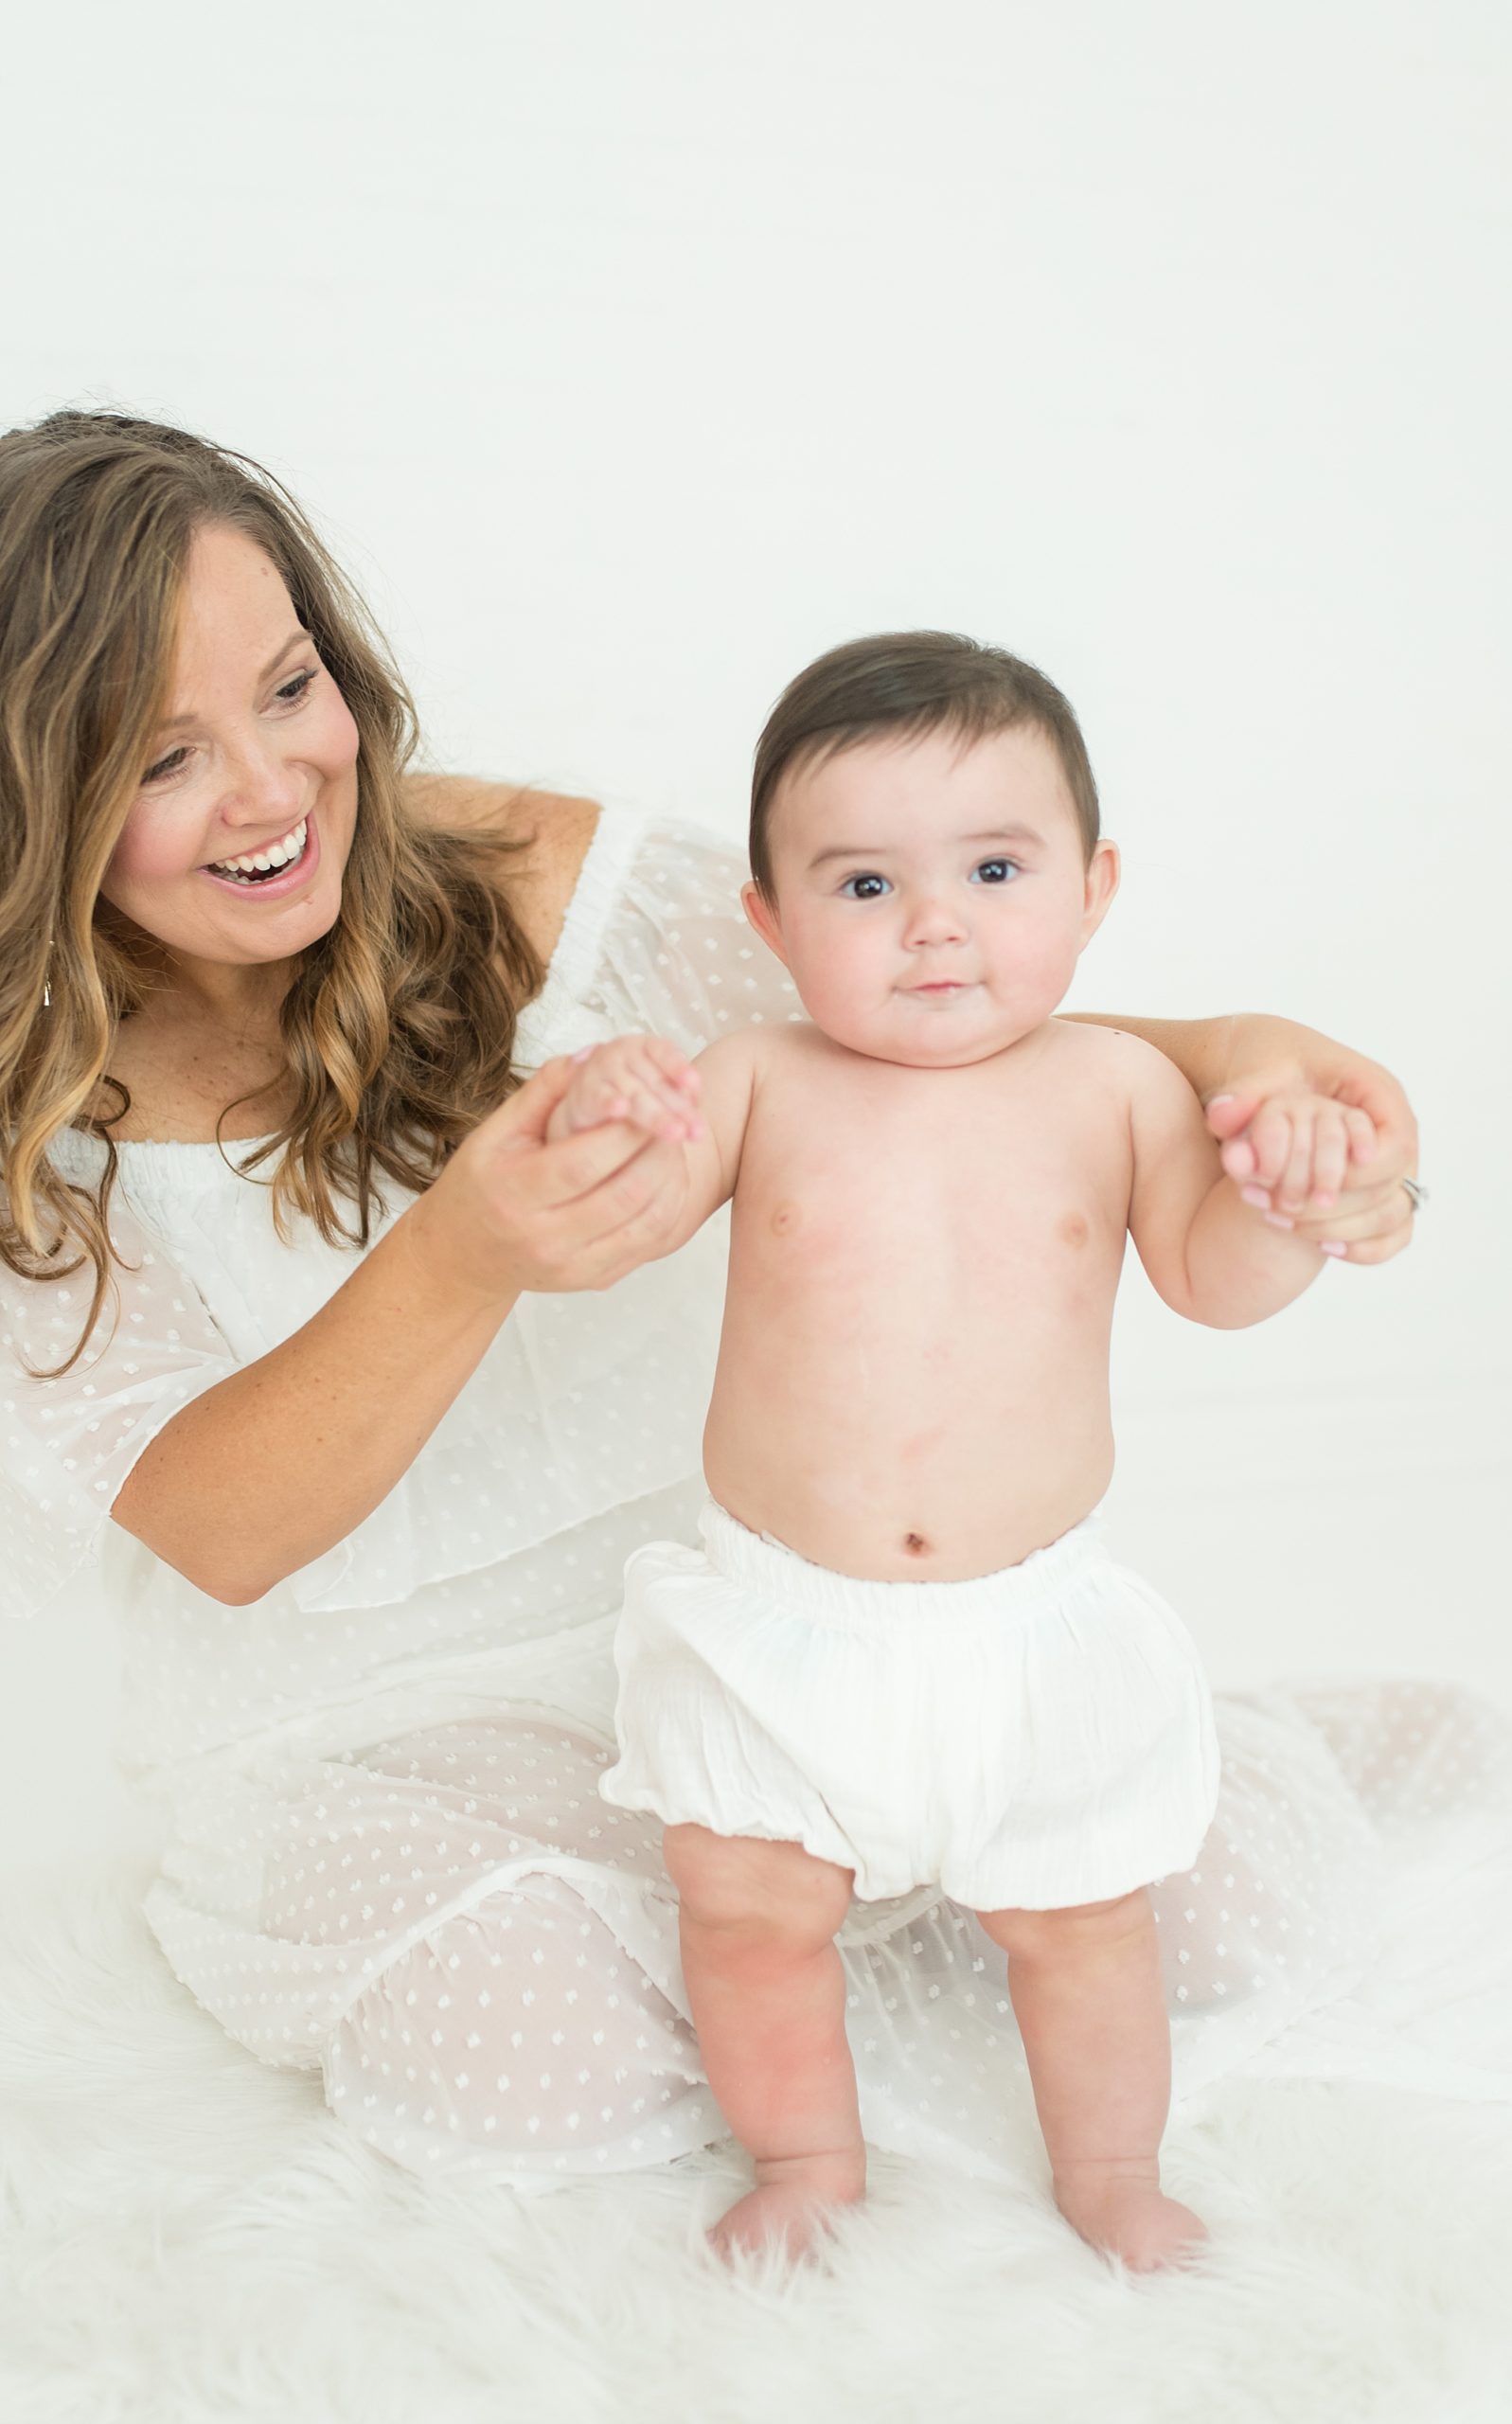 baby stands up with a little help from his mom during milestone portraits 